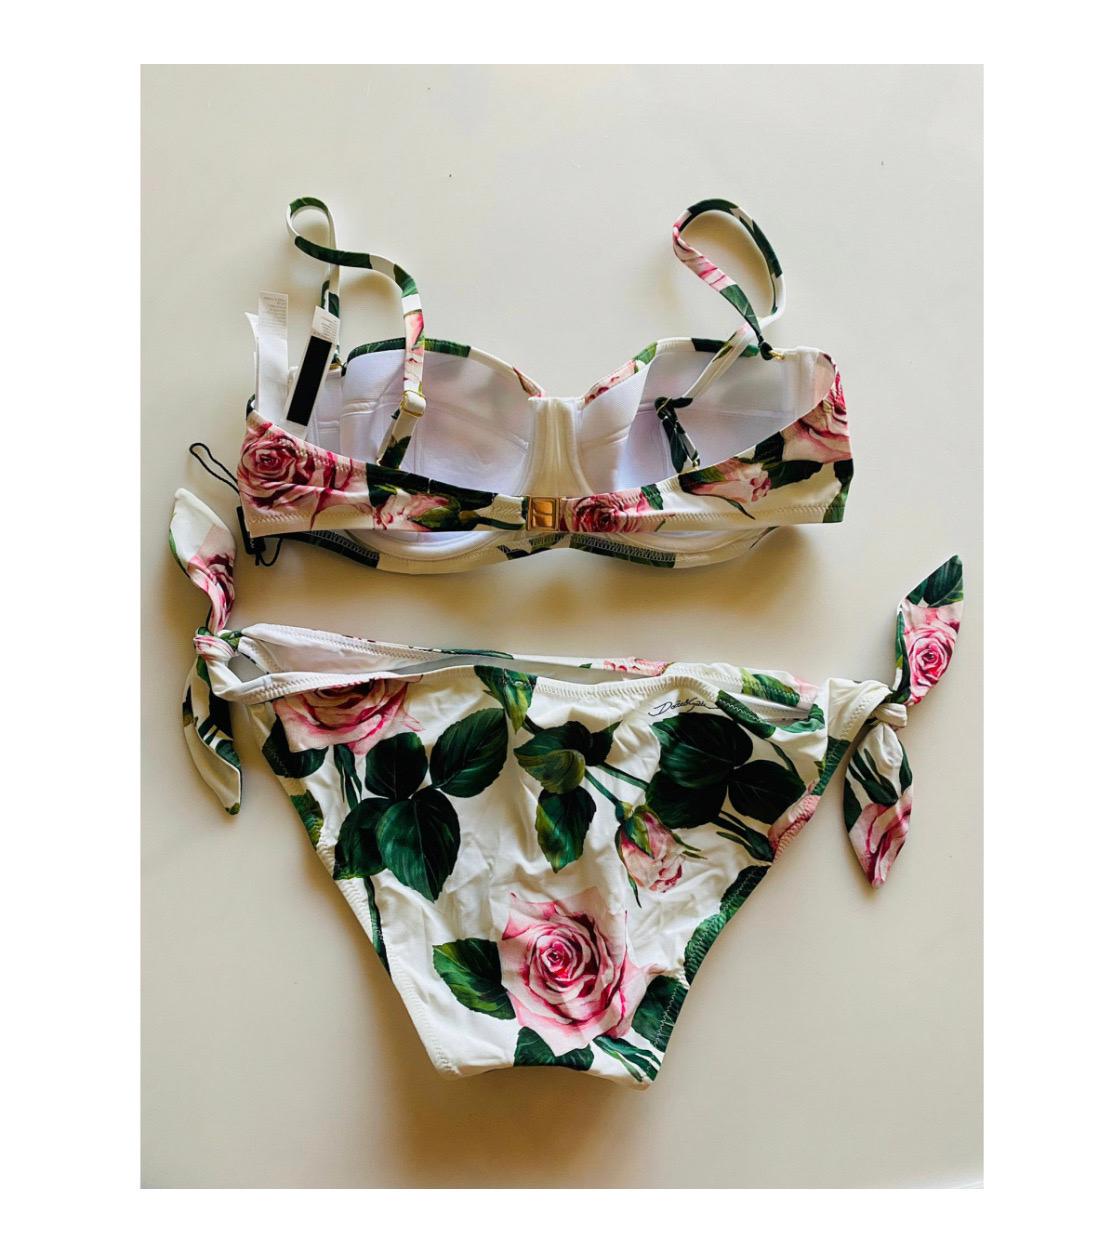 Dolce & Gabbana timeless
balconette bikini top and bottoms set
in fine fabric comes in TROPICAL
ROSE print and is perfect for
enhancing every woman’s femininity:

- Bra with padded cups and wiring

- Adjustable bows on the sides

- Rear branded